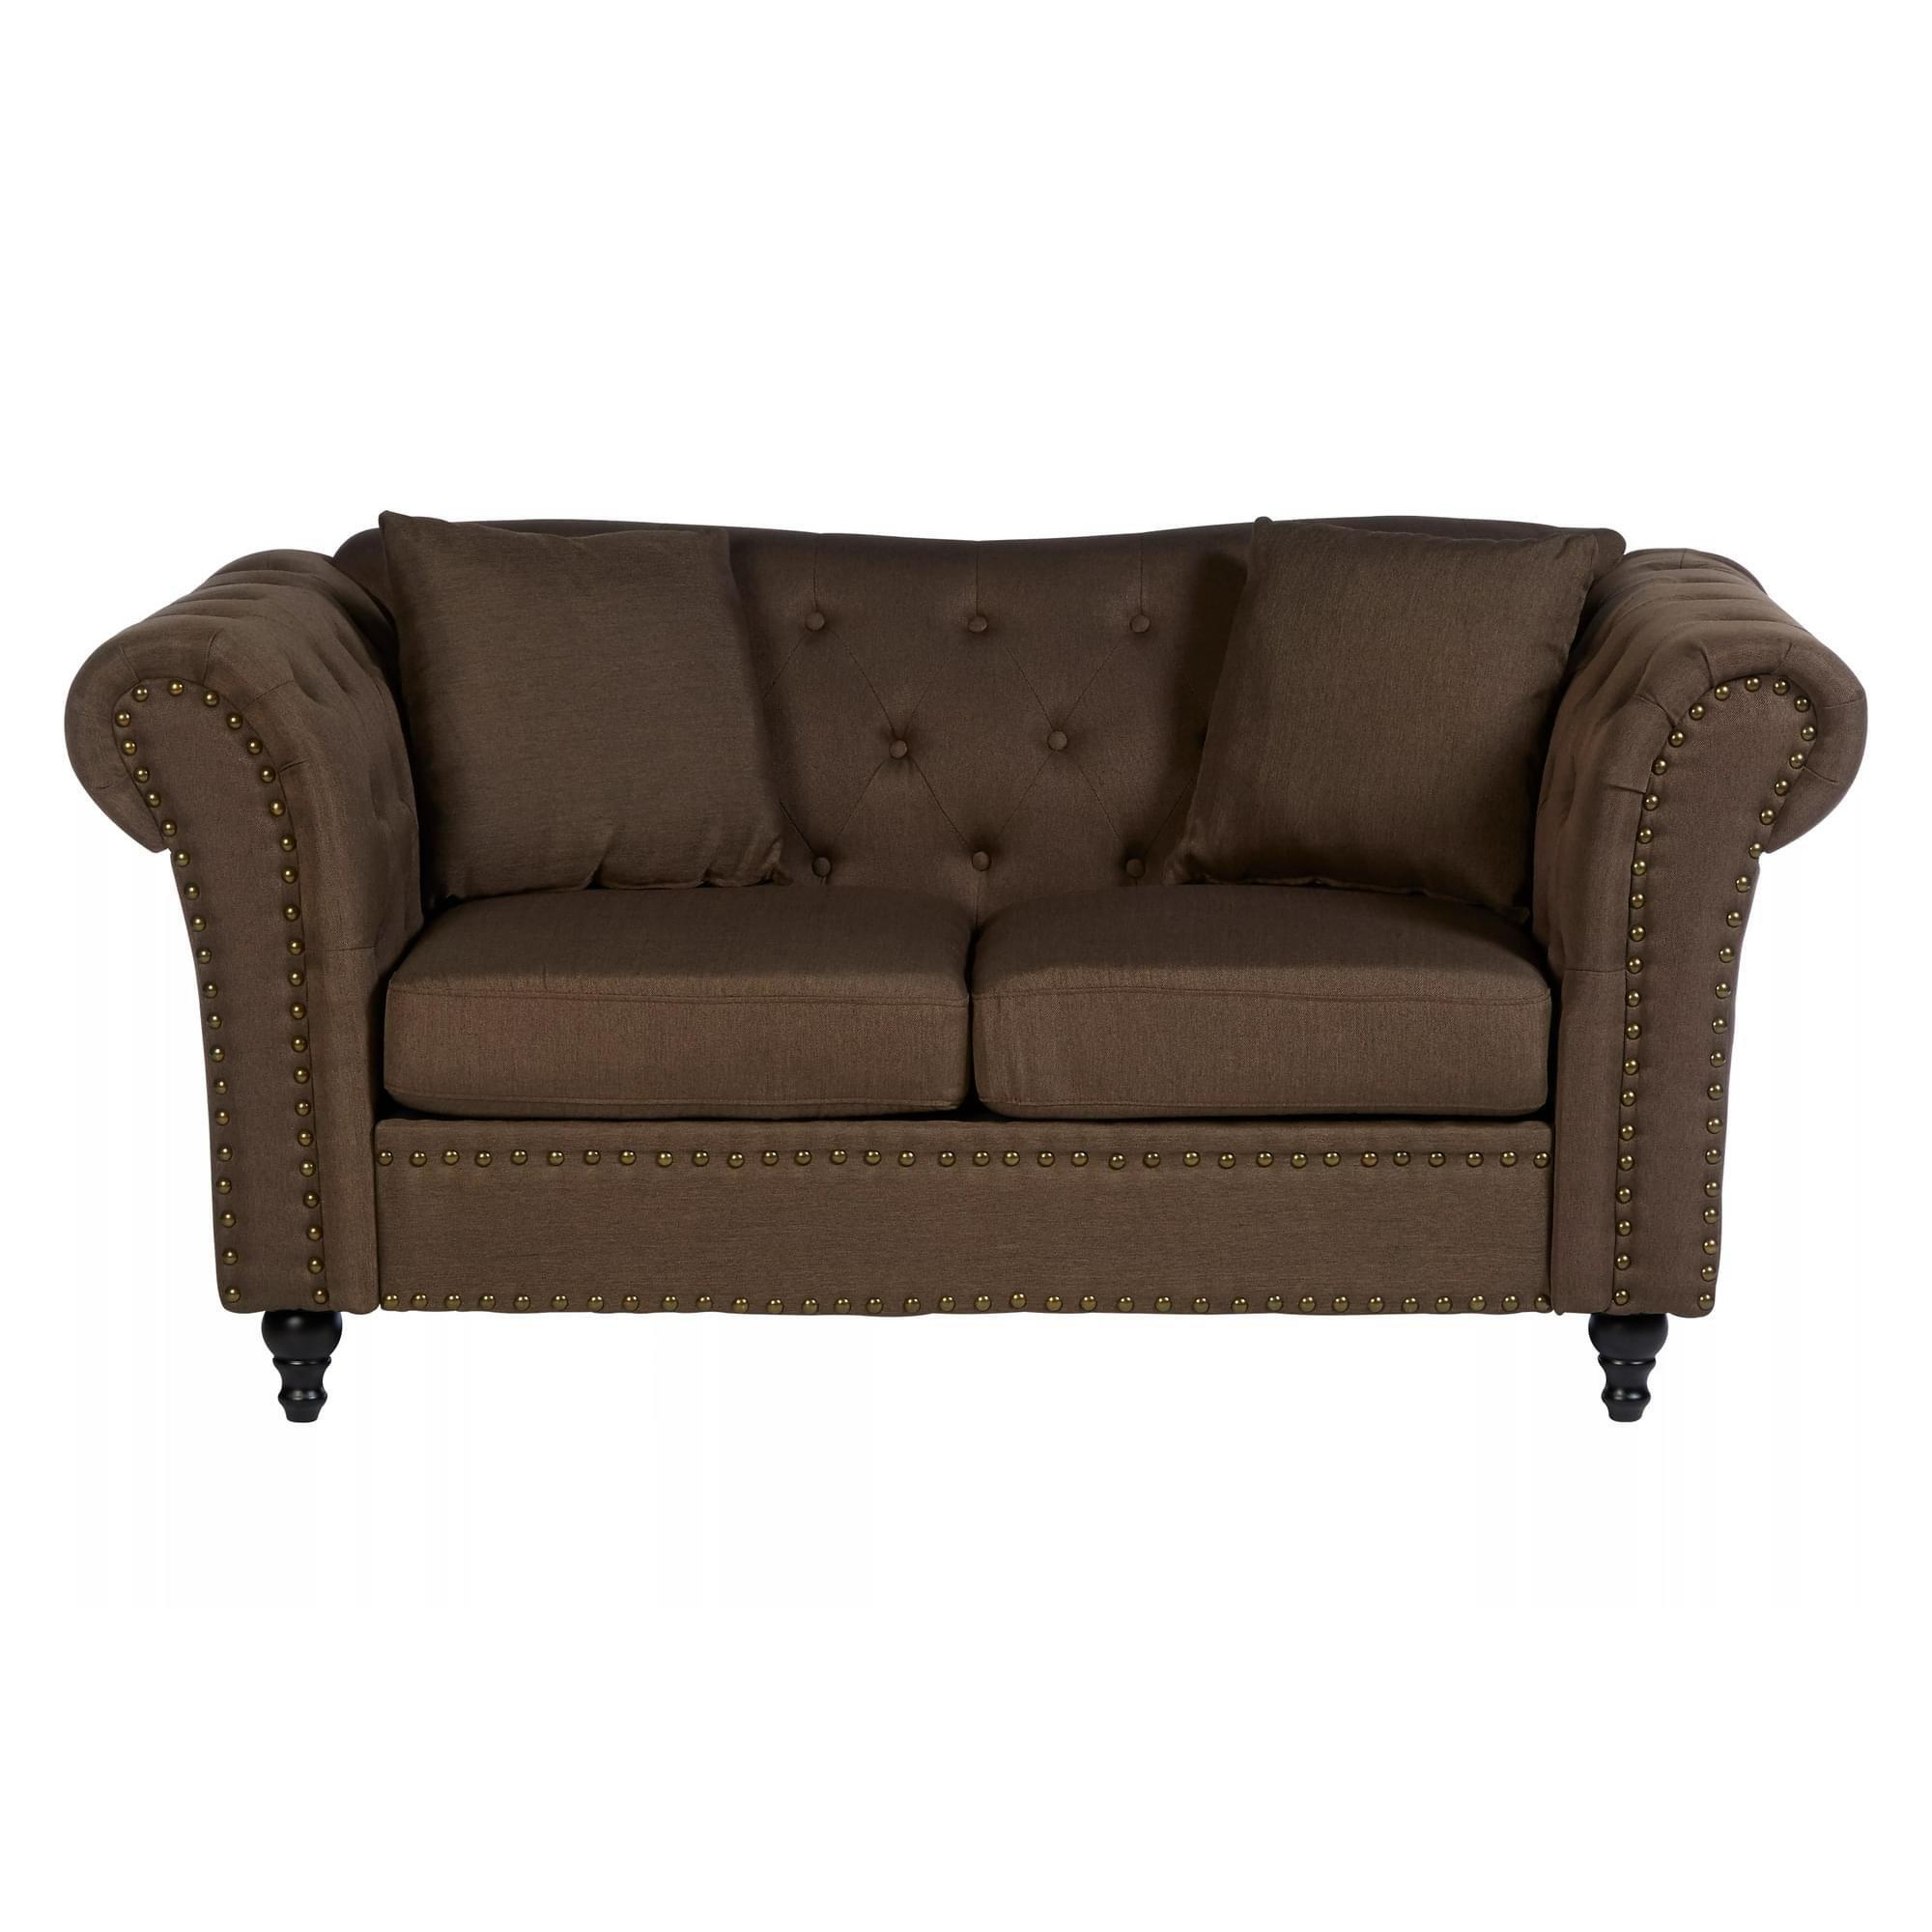 Interiors by Premier Fable 2 Seat Chesterfield Sofa - image 1